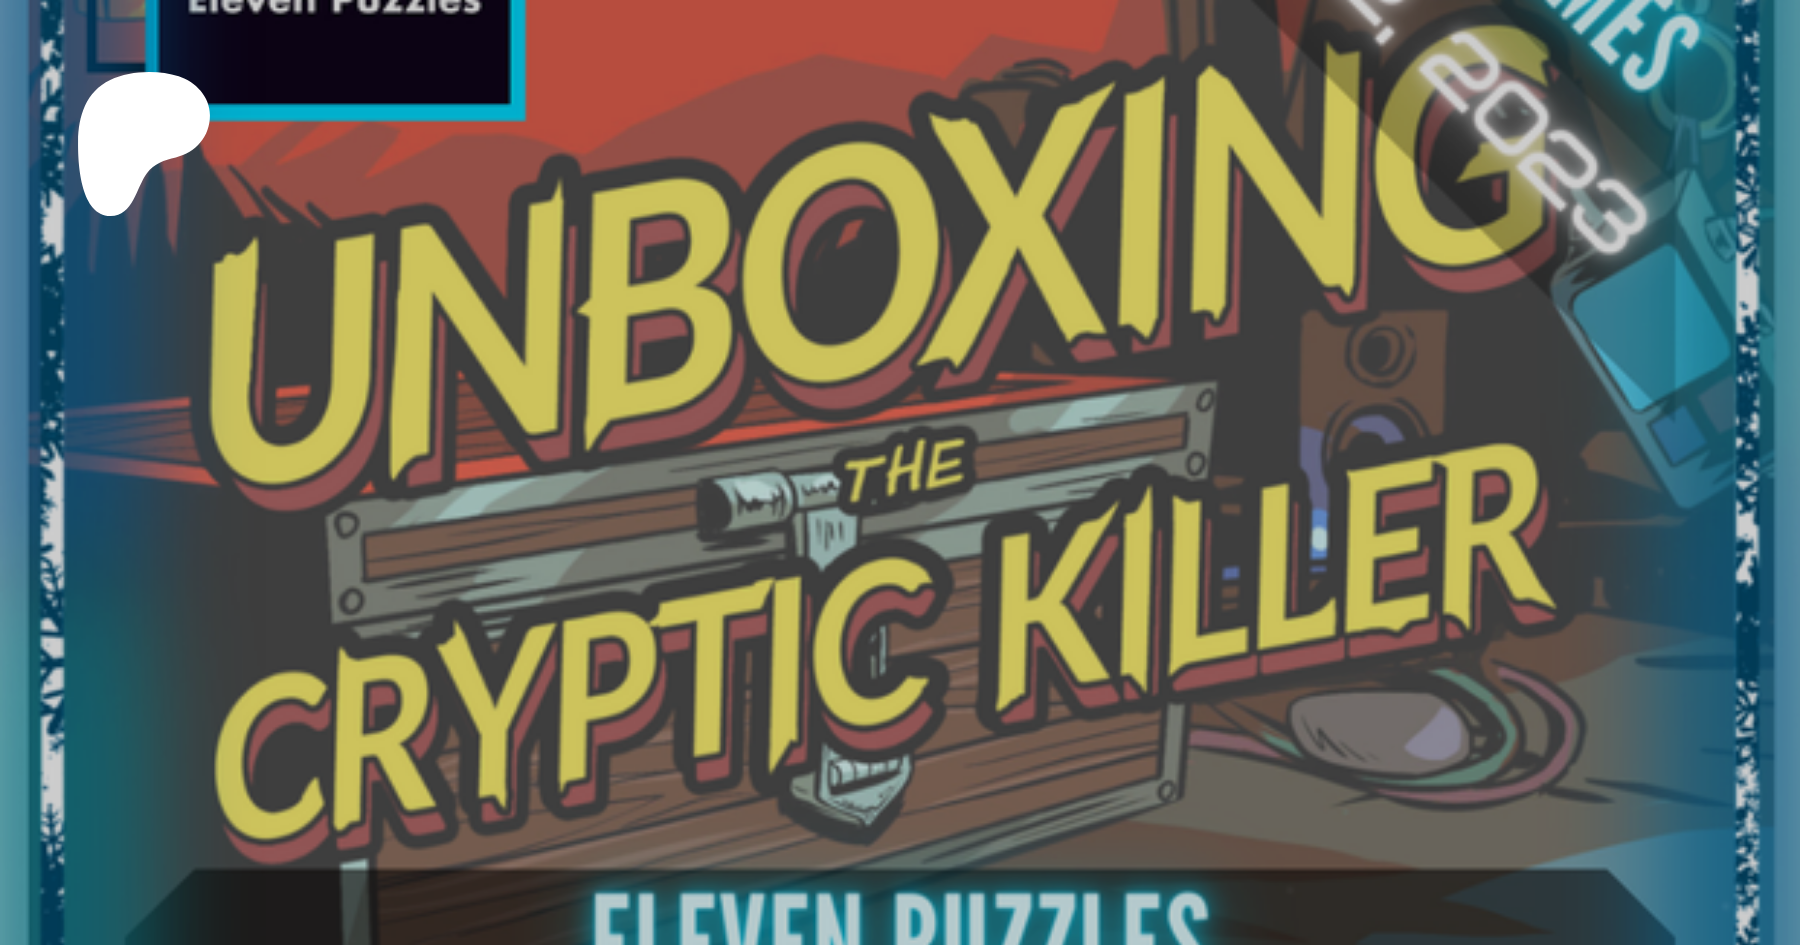 Eleven Puzzles - Unboxing the Cryptic Killer